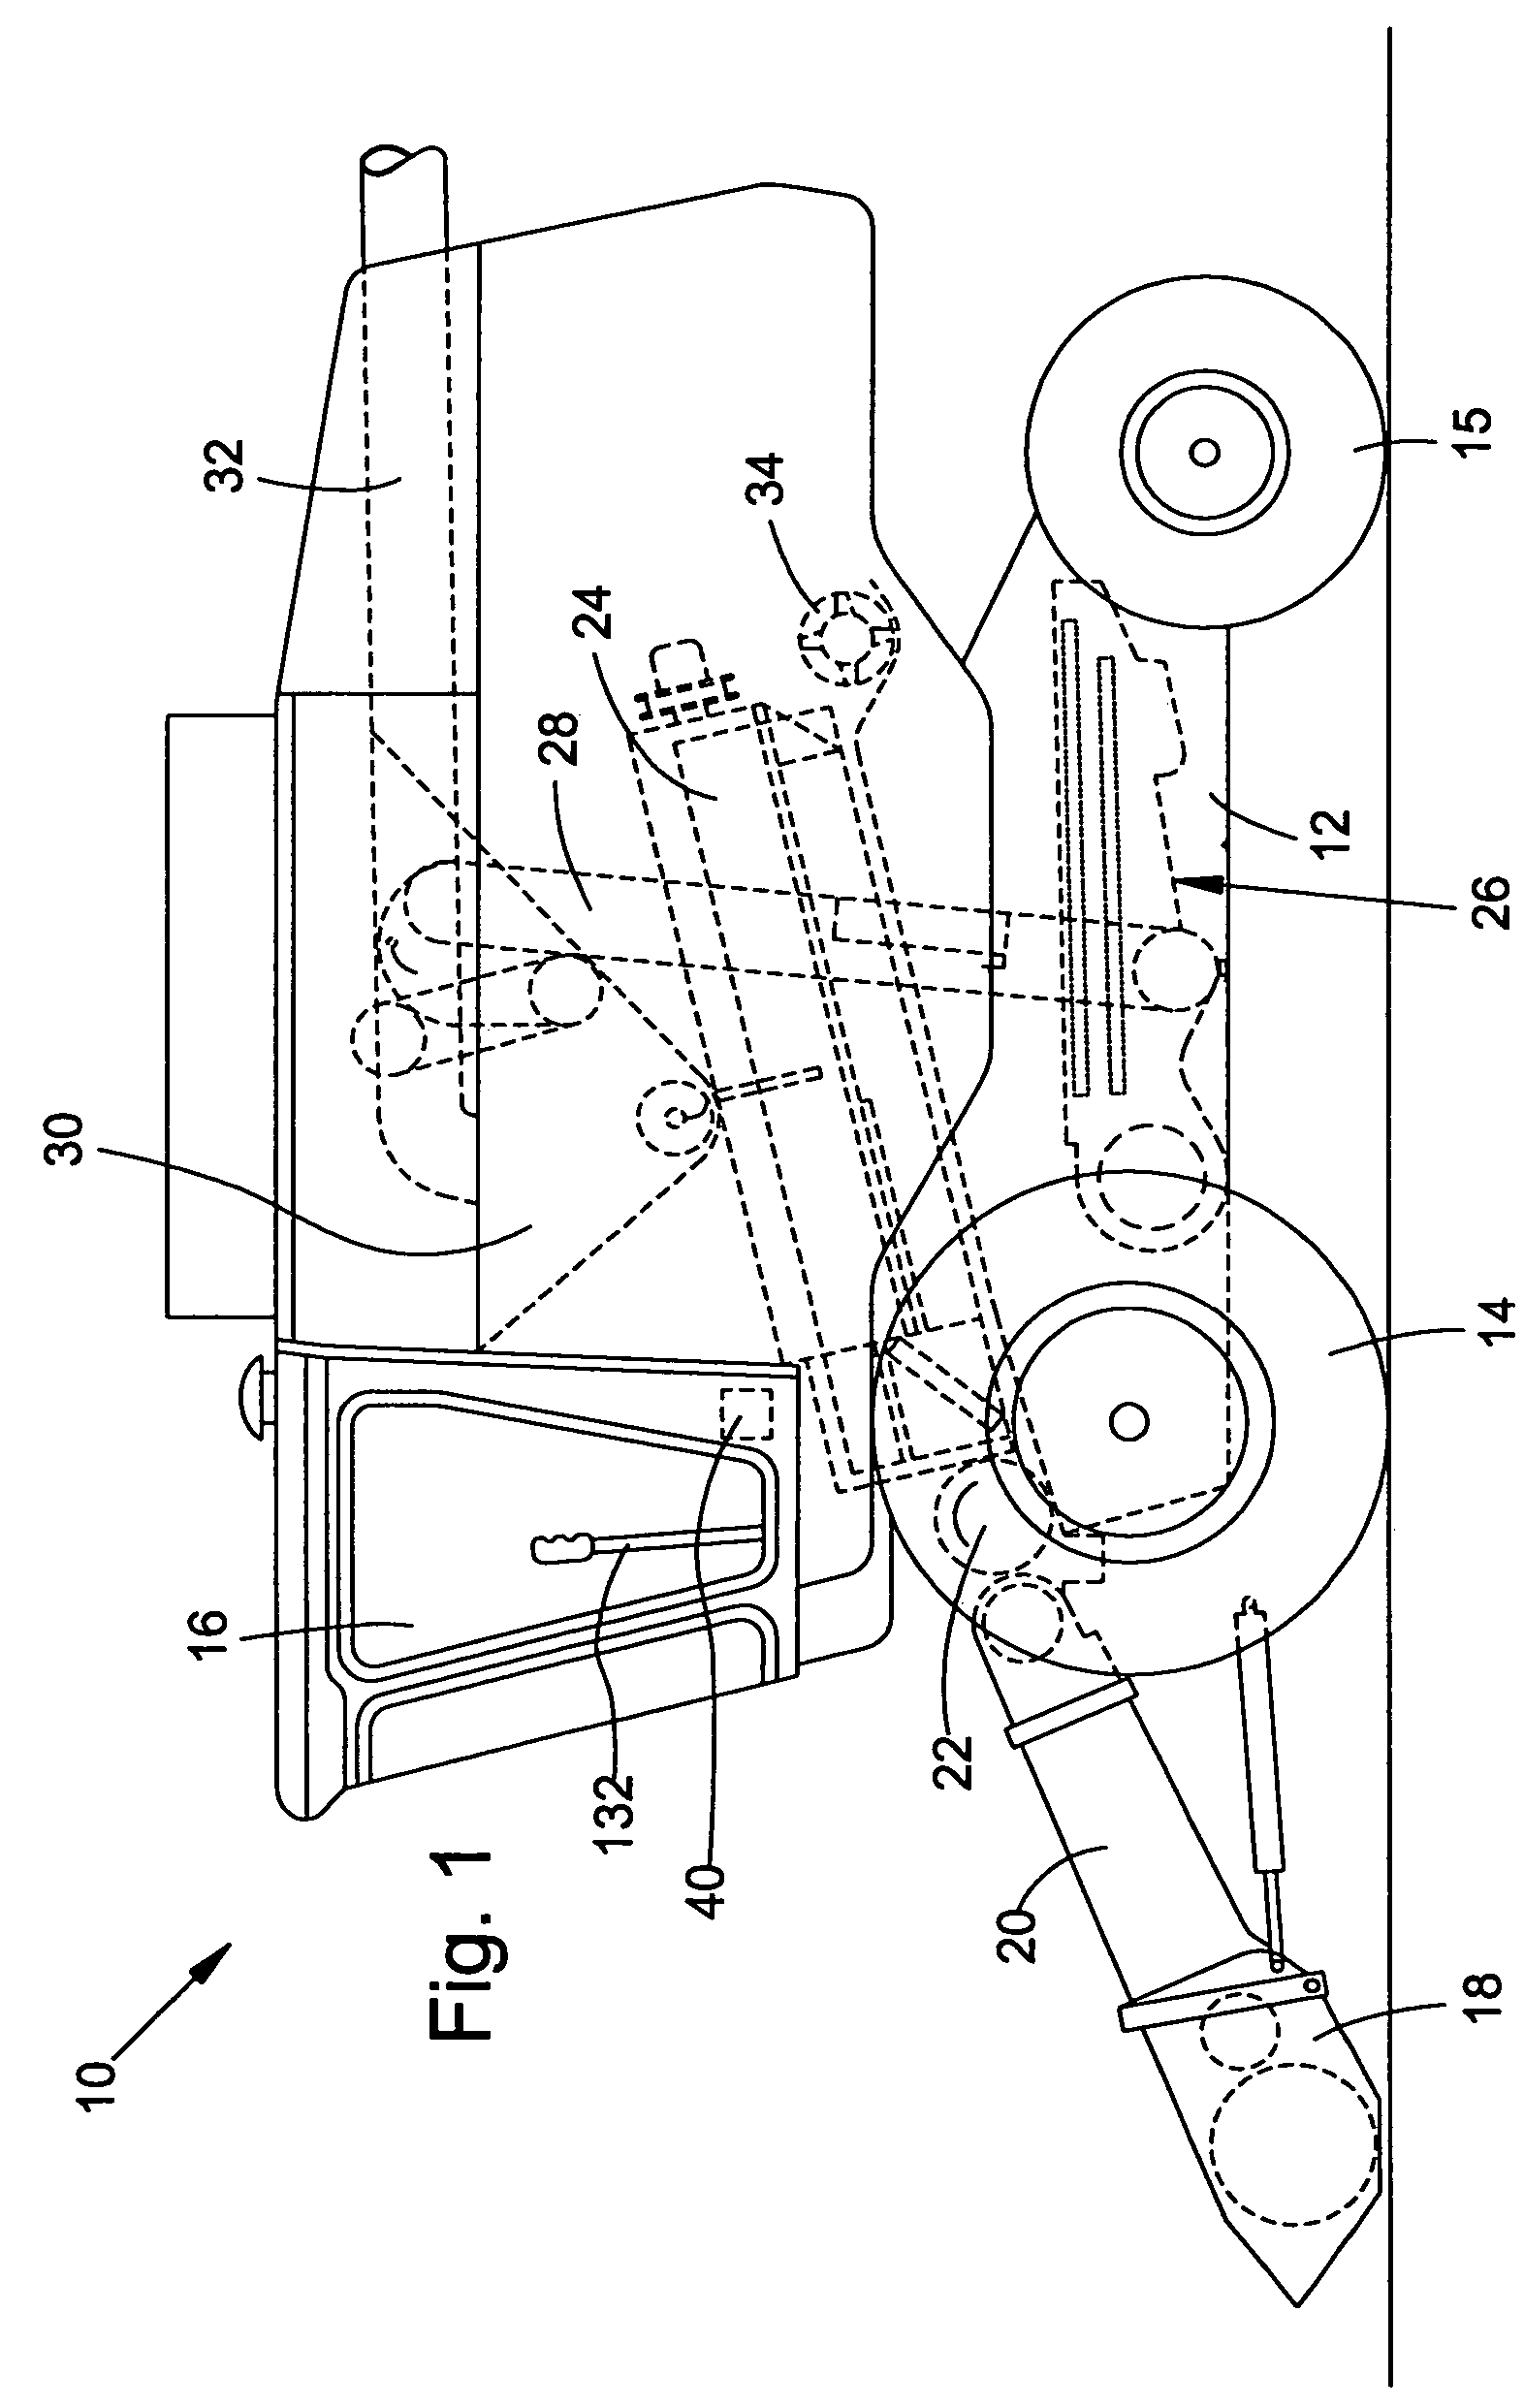 Variable resolution single lever speed control for a hydrostatic transmission